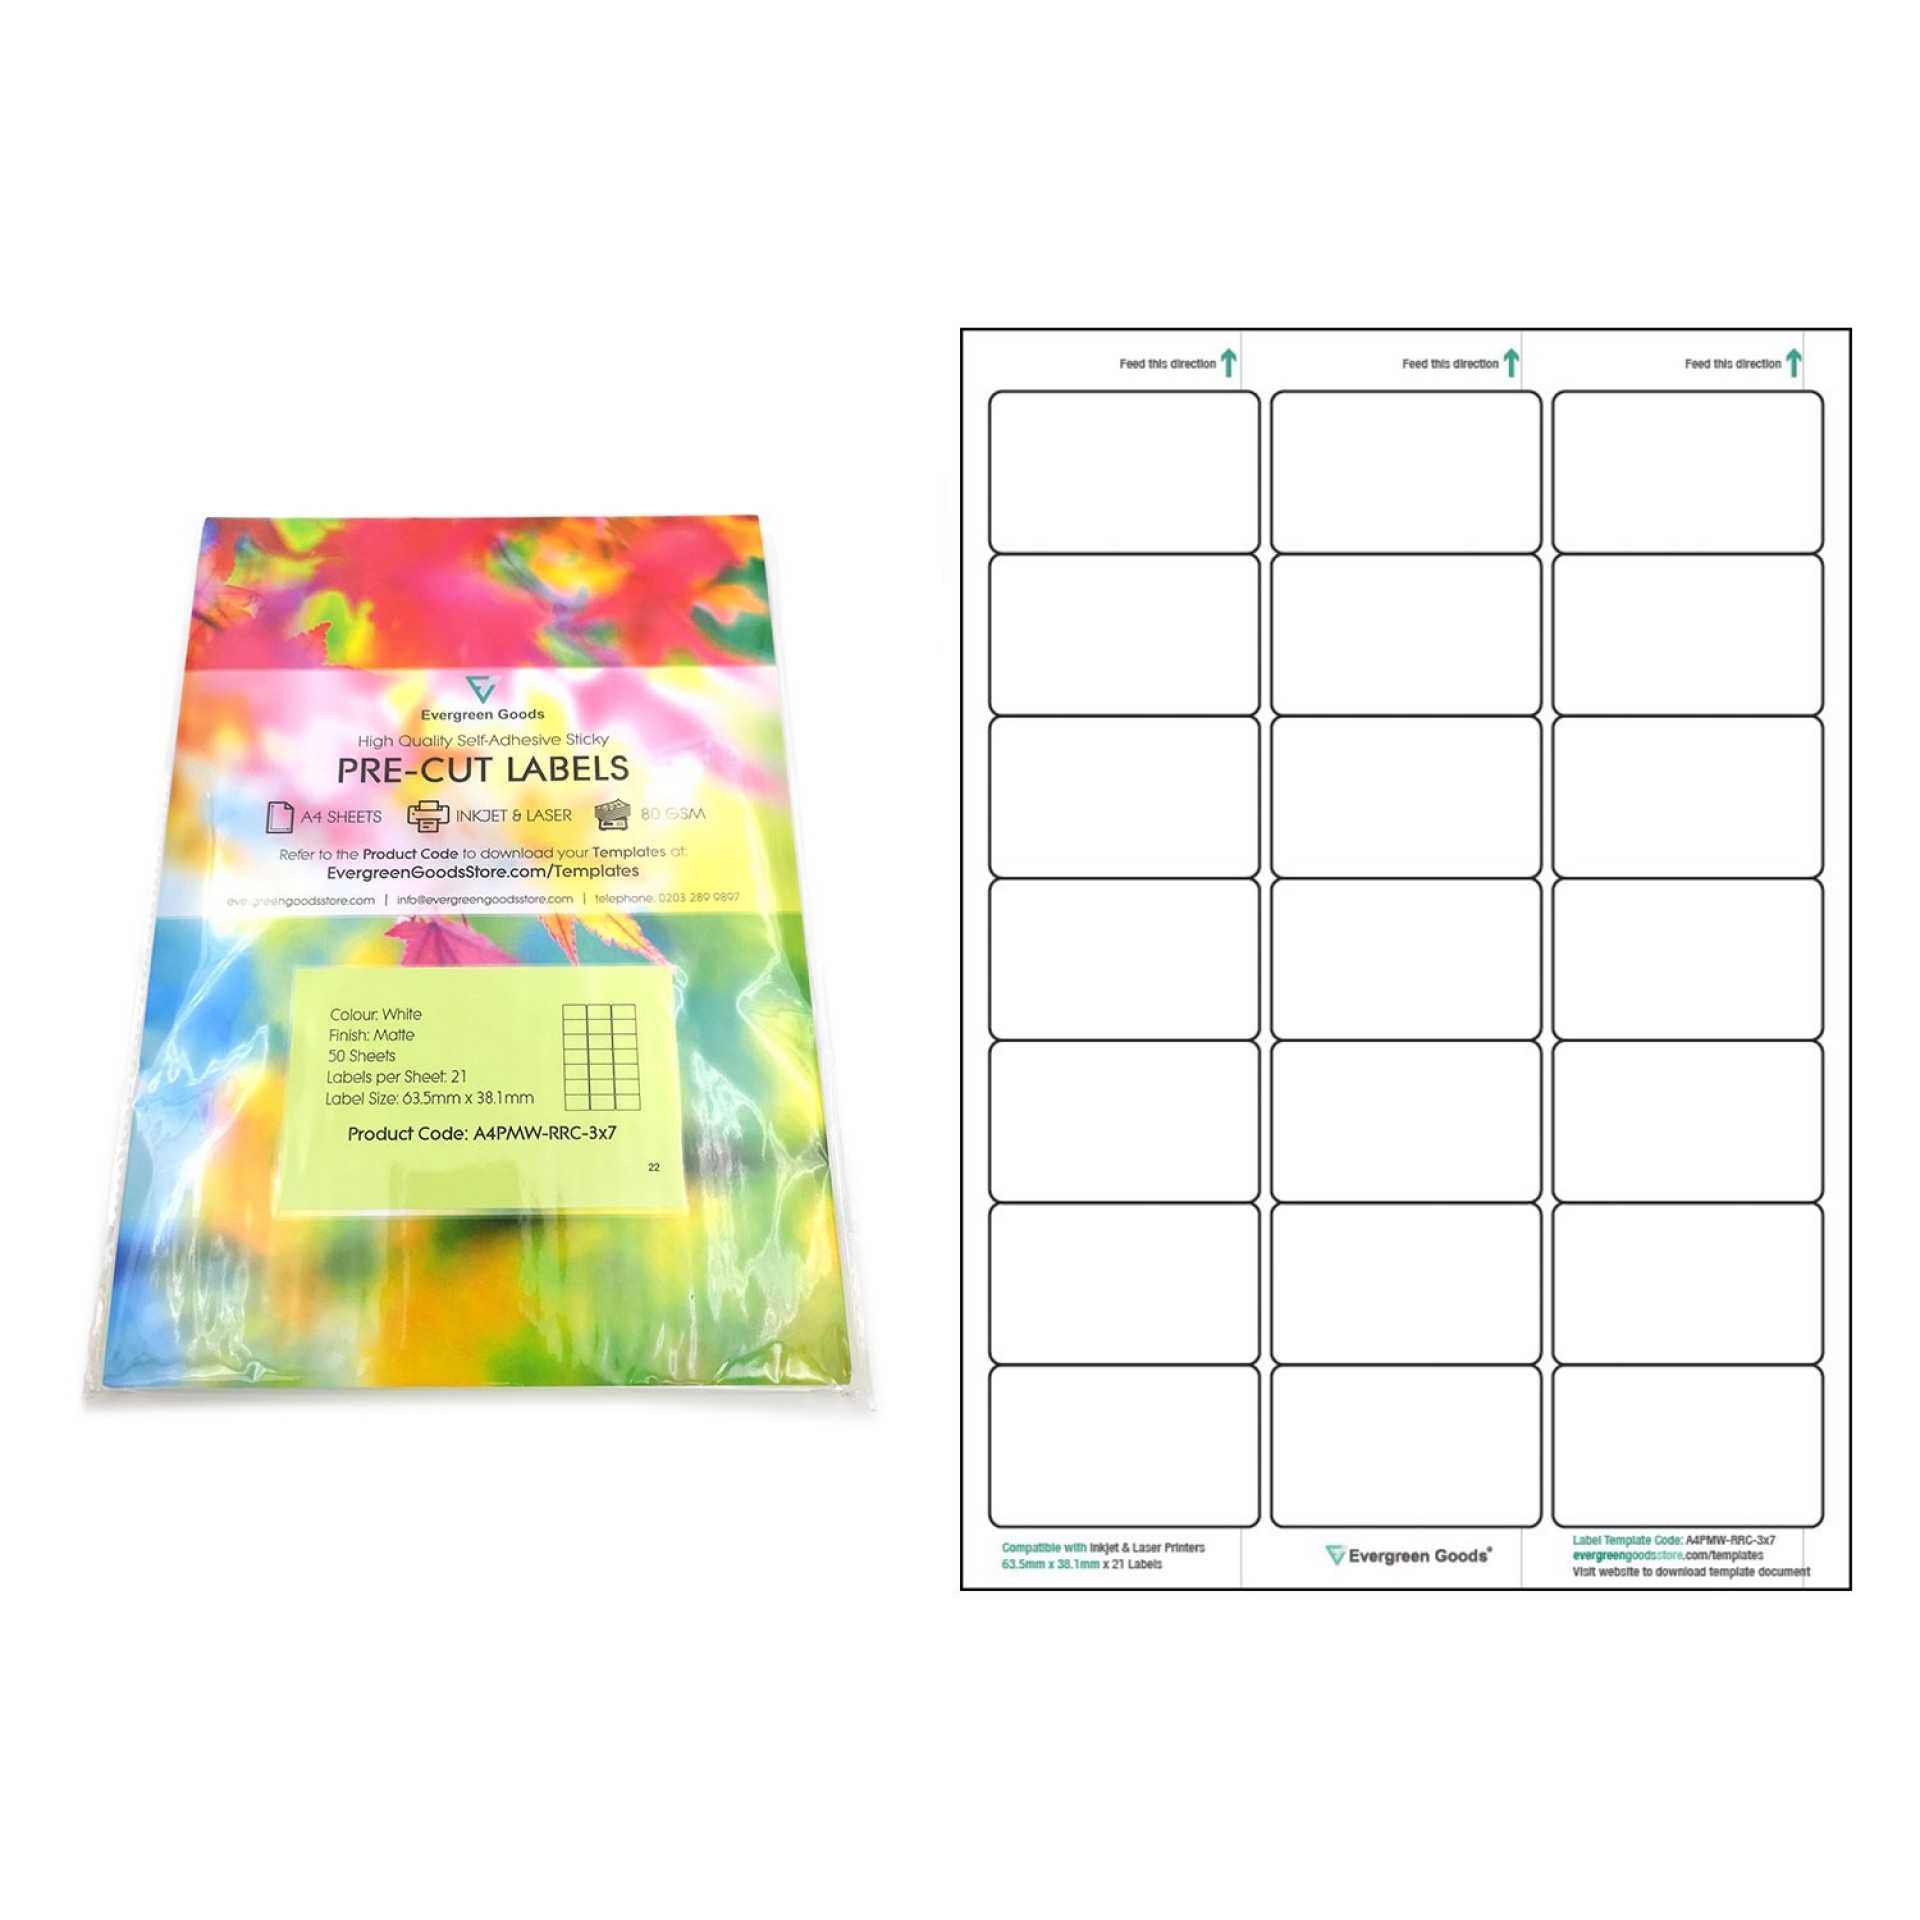 001 Word Label Template Per Sheet Ideas A4Pmw Rrc 3X7 Pertaining To Label Template 21 Per Sheet Word